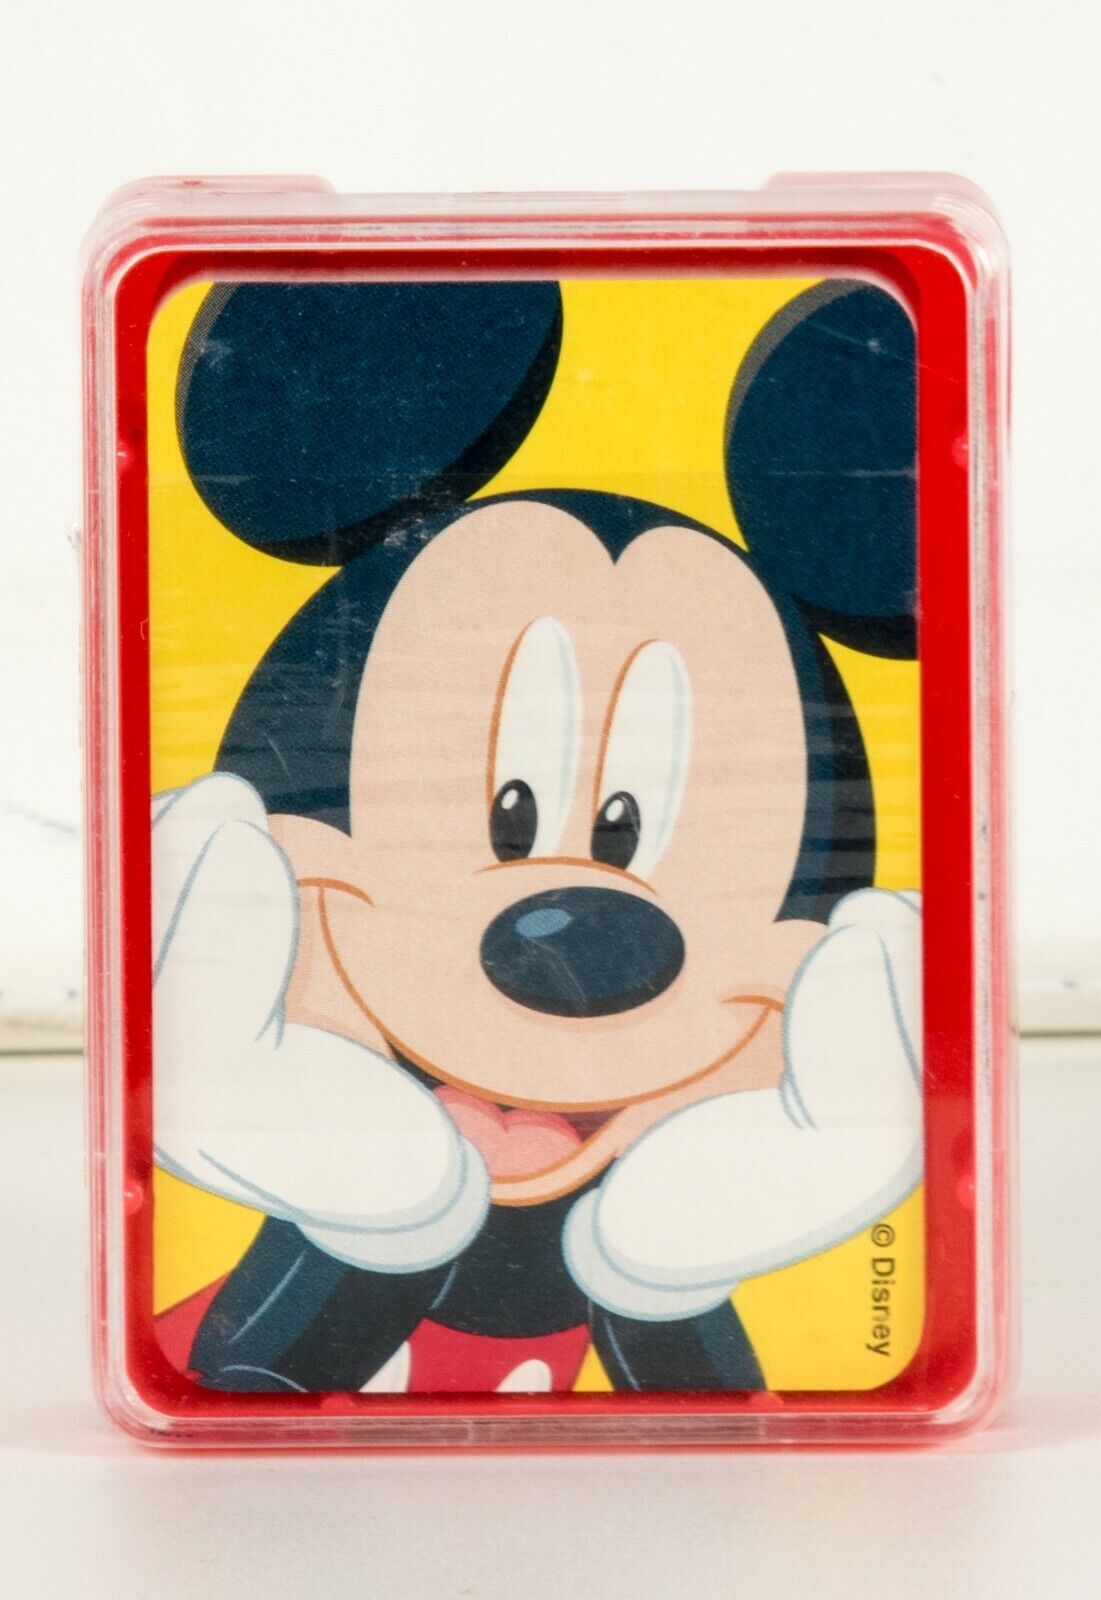 Disney Mickey Mouse Playing Cards Mini Deck - NEW NRFP